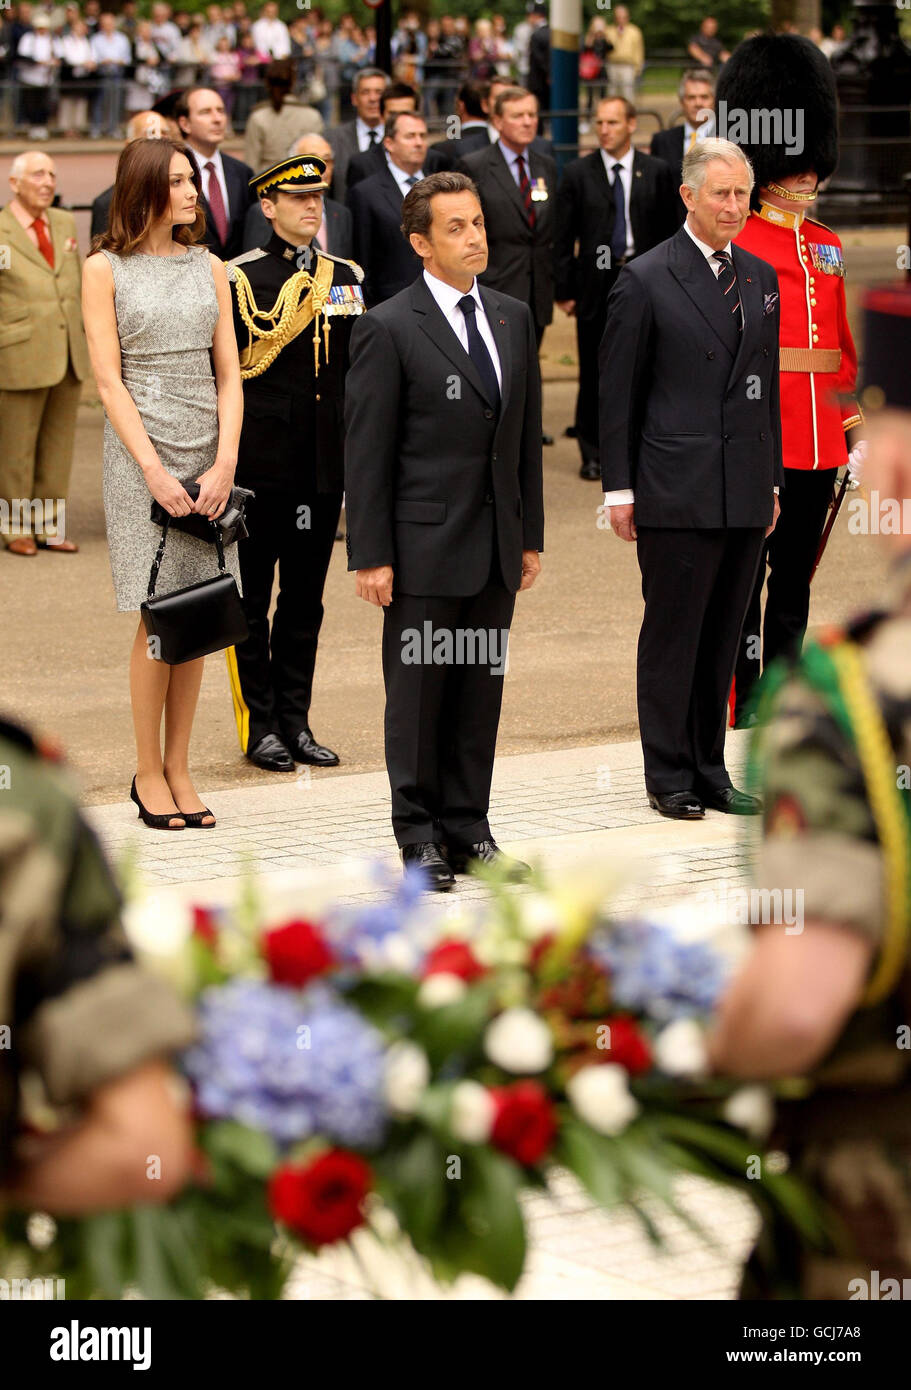 The Prince of Wales (right) French President Nicolas Sarkozy (centre) and his wife Carla Bruni prepare to lay a wreath at the statues of HM King George VI and HM Queen Elizabeth on the Mall in London. Stock Photo